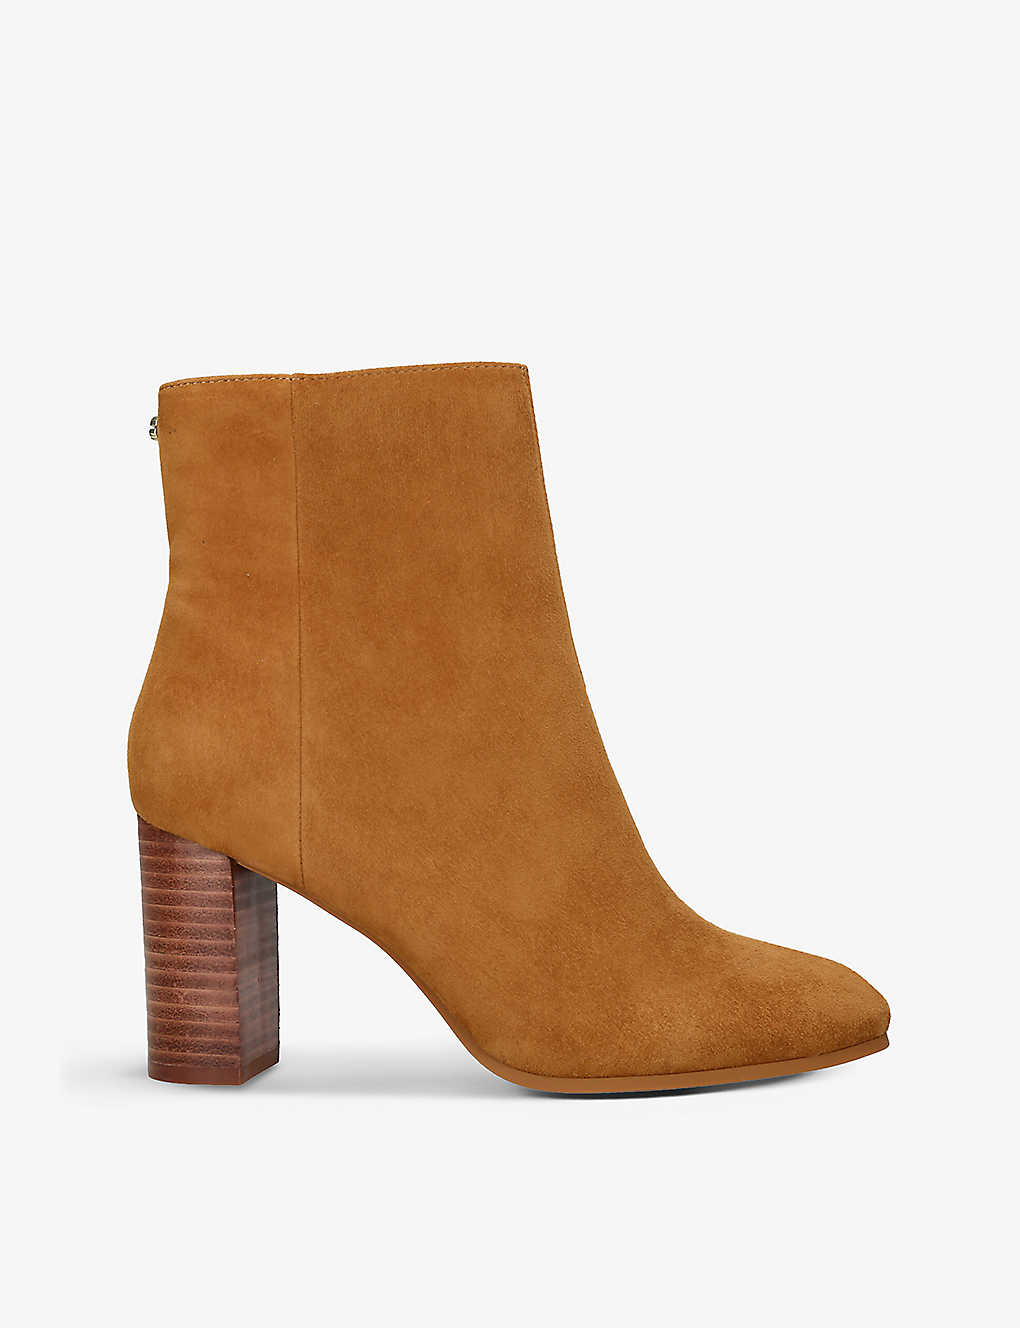 Carvela Womens Tan Pose Suede-leather Heeled Ankle Boots